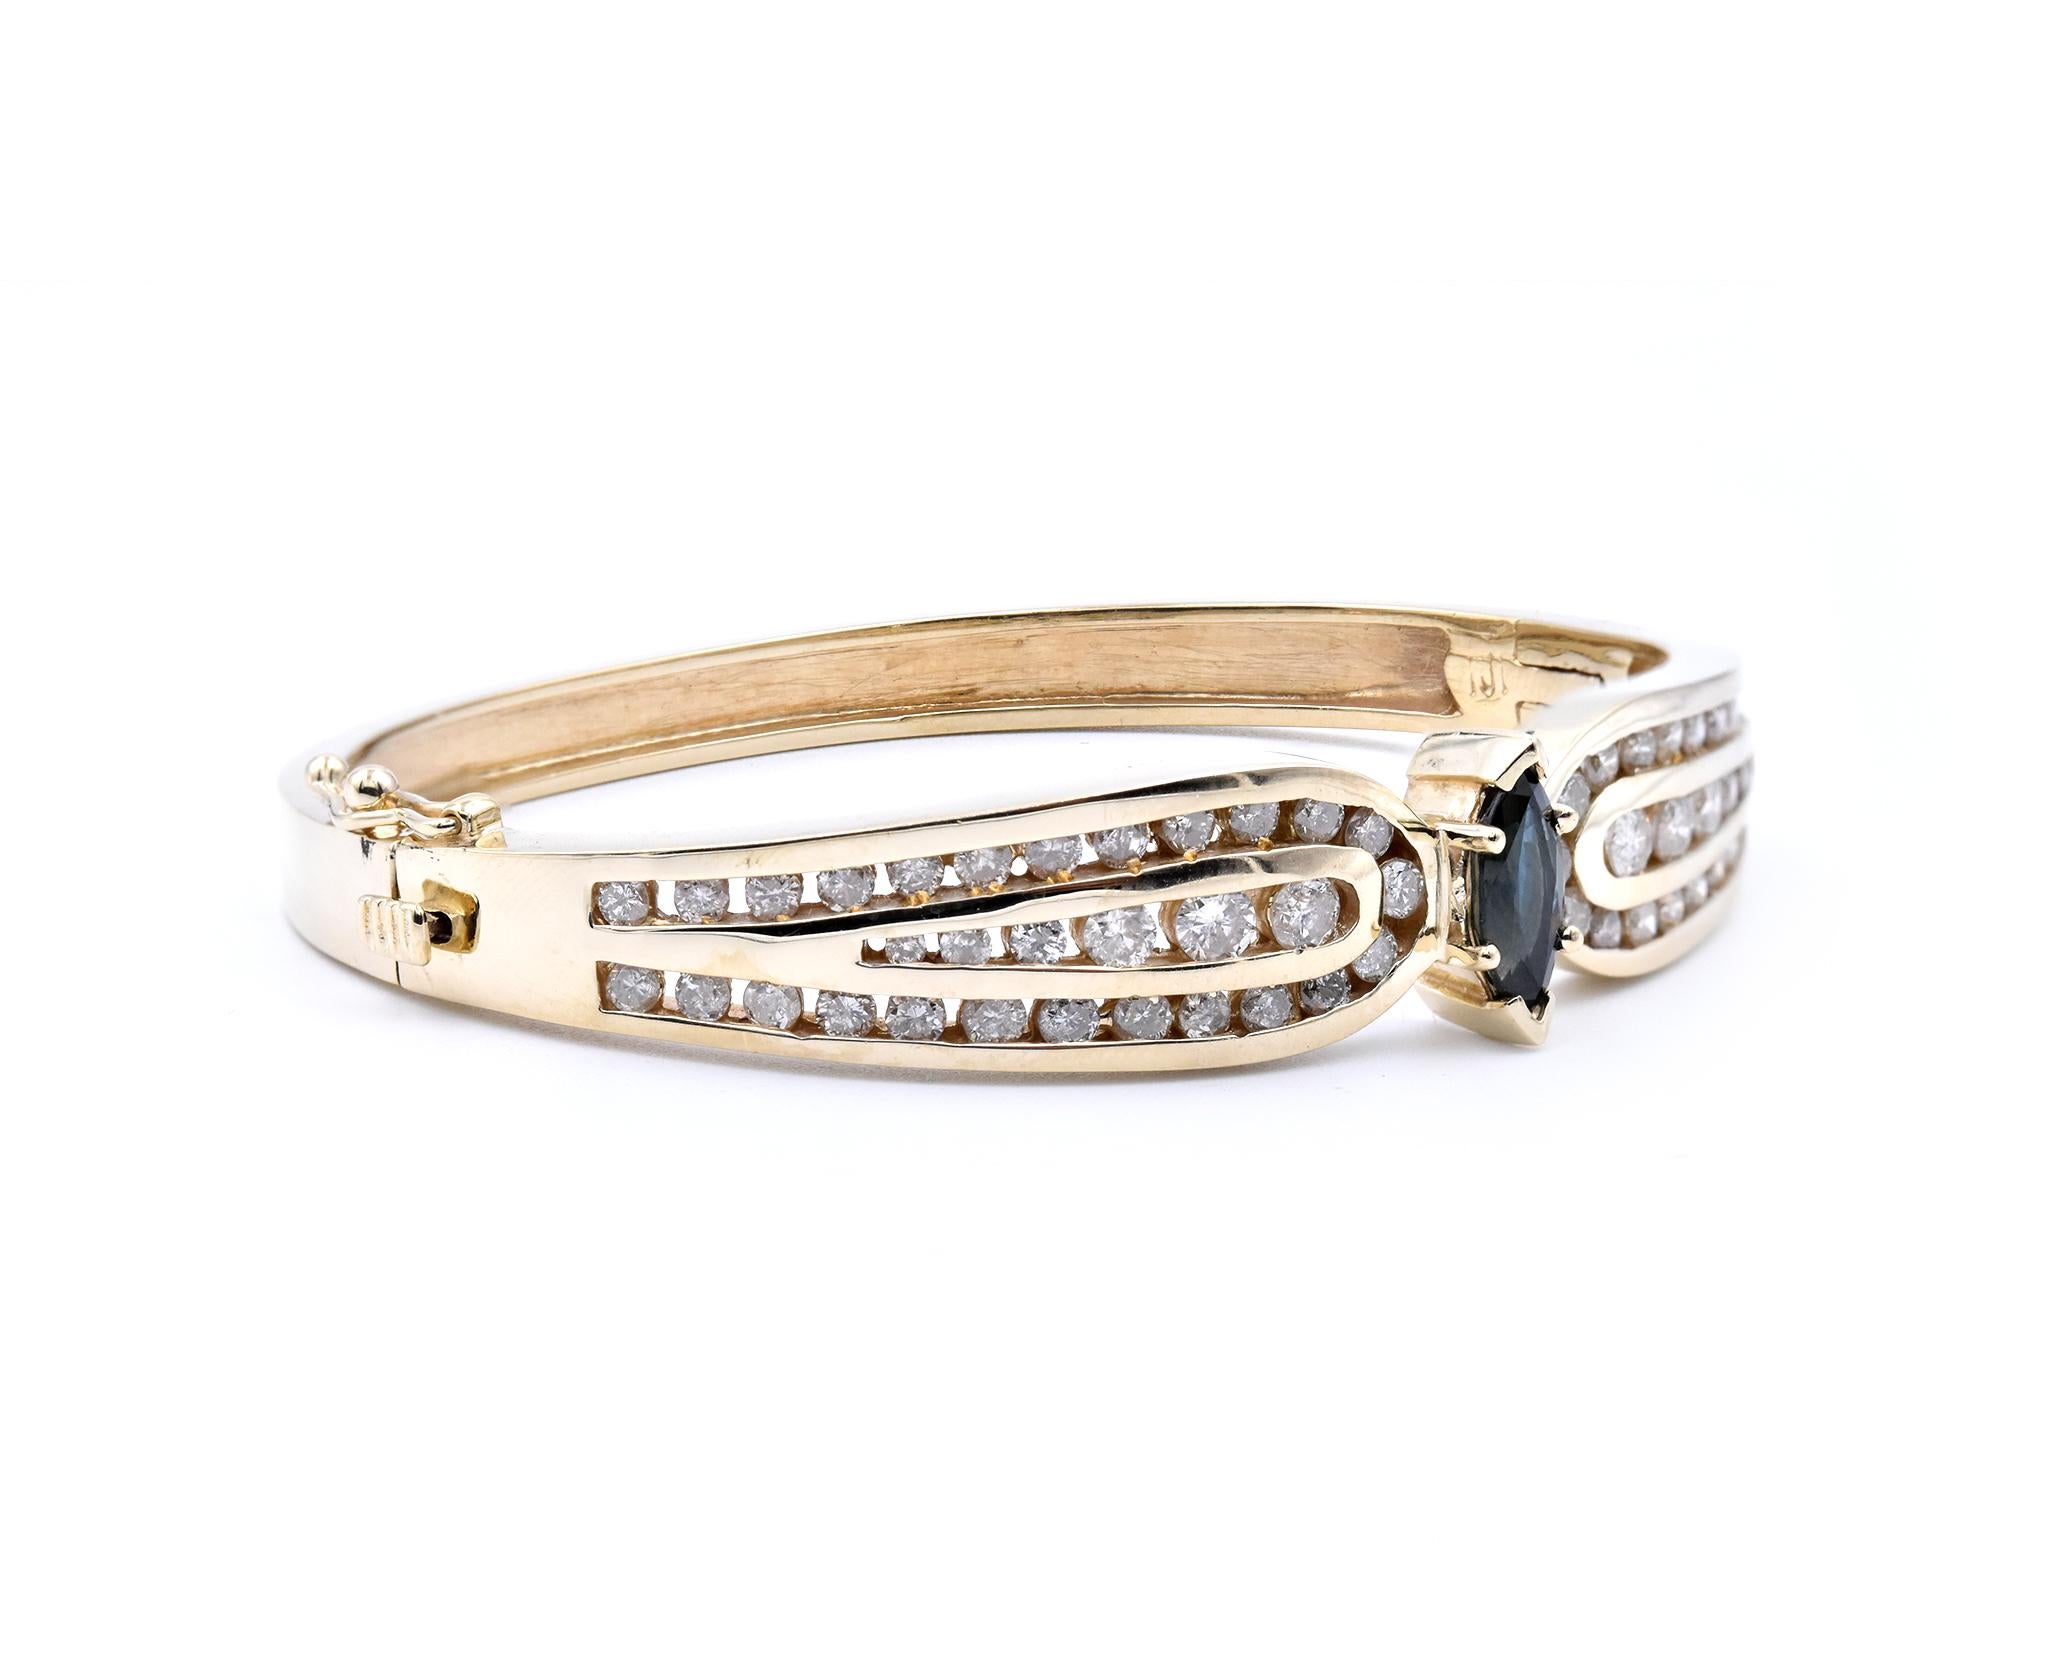 Material: 14K Yellow Gold 
Sapphire: 1 marquise cut = 1.02ct
Diamonds: 38 round cut = 2.42cttw
Color: H
Clarity: SI2
Dimensions: bracelet will fit a 6.5-inch wrist, measures 12.3mm in width
Weight: 28.7 grams